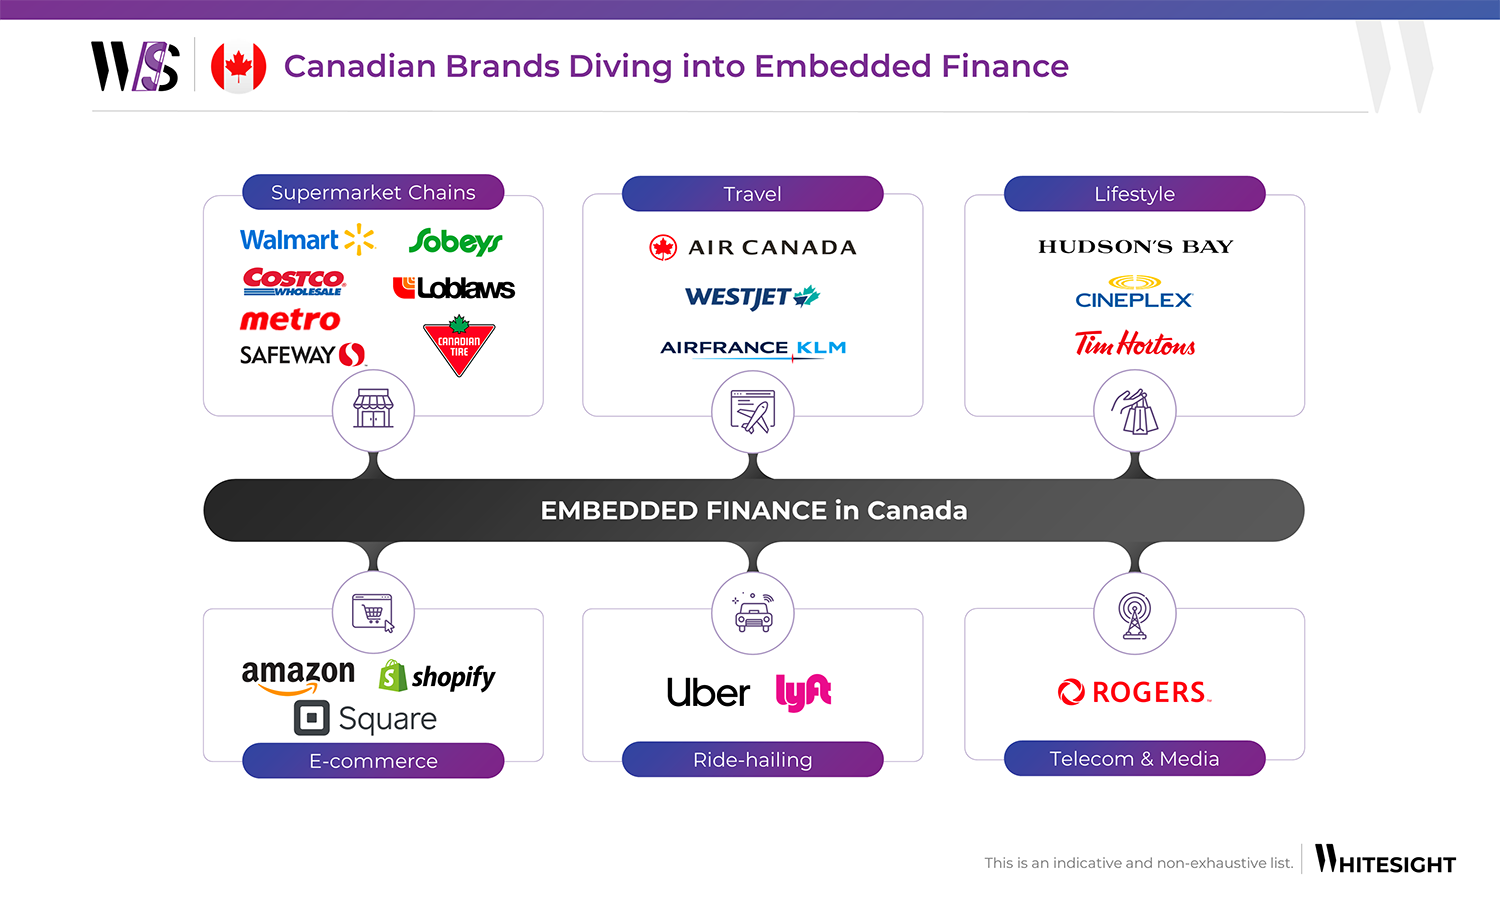 WhiteSight-Canadian-Brands-Diving-into-Embedded-Finance